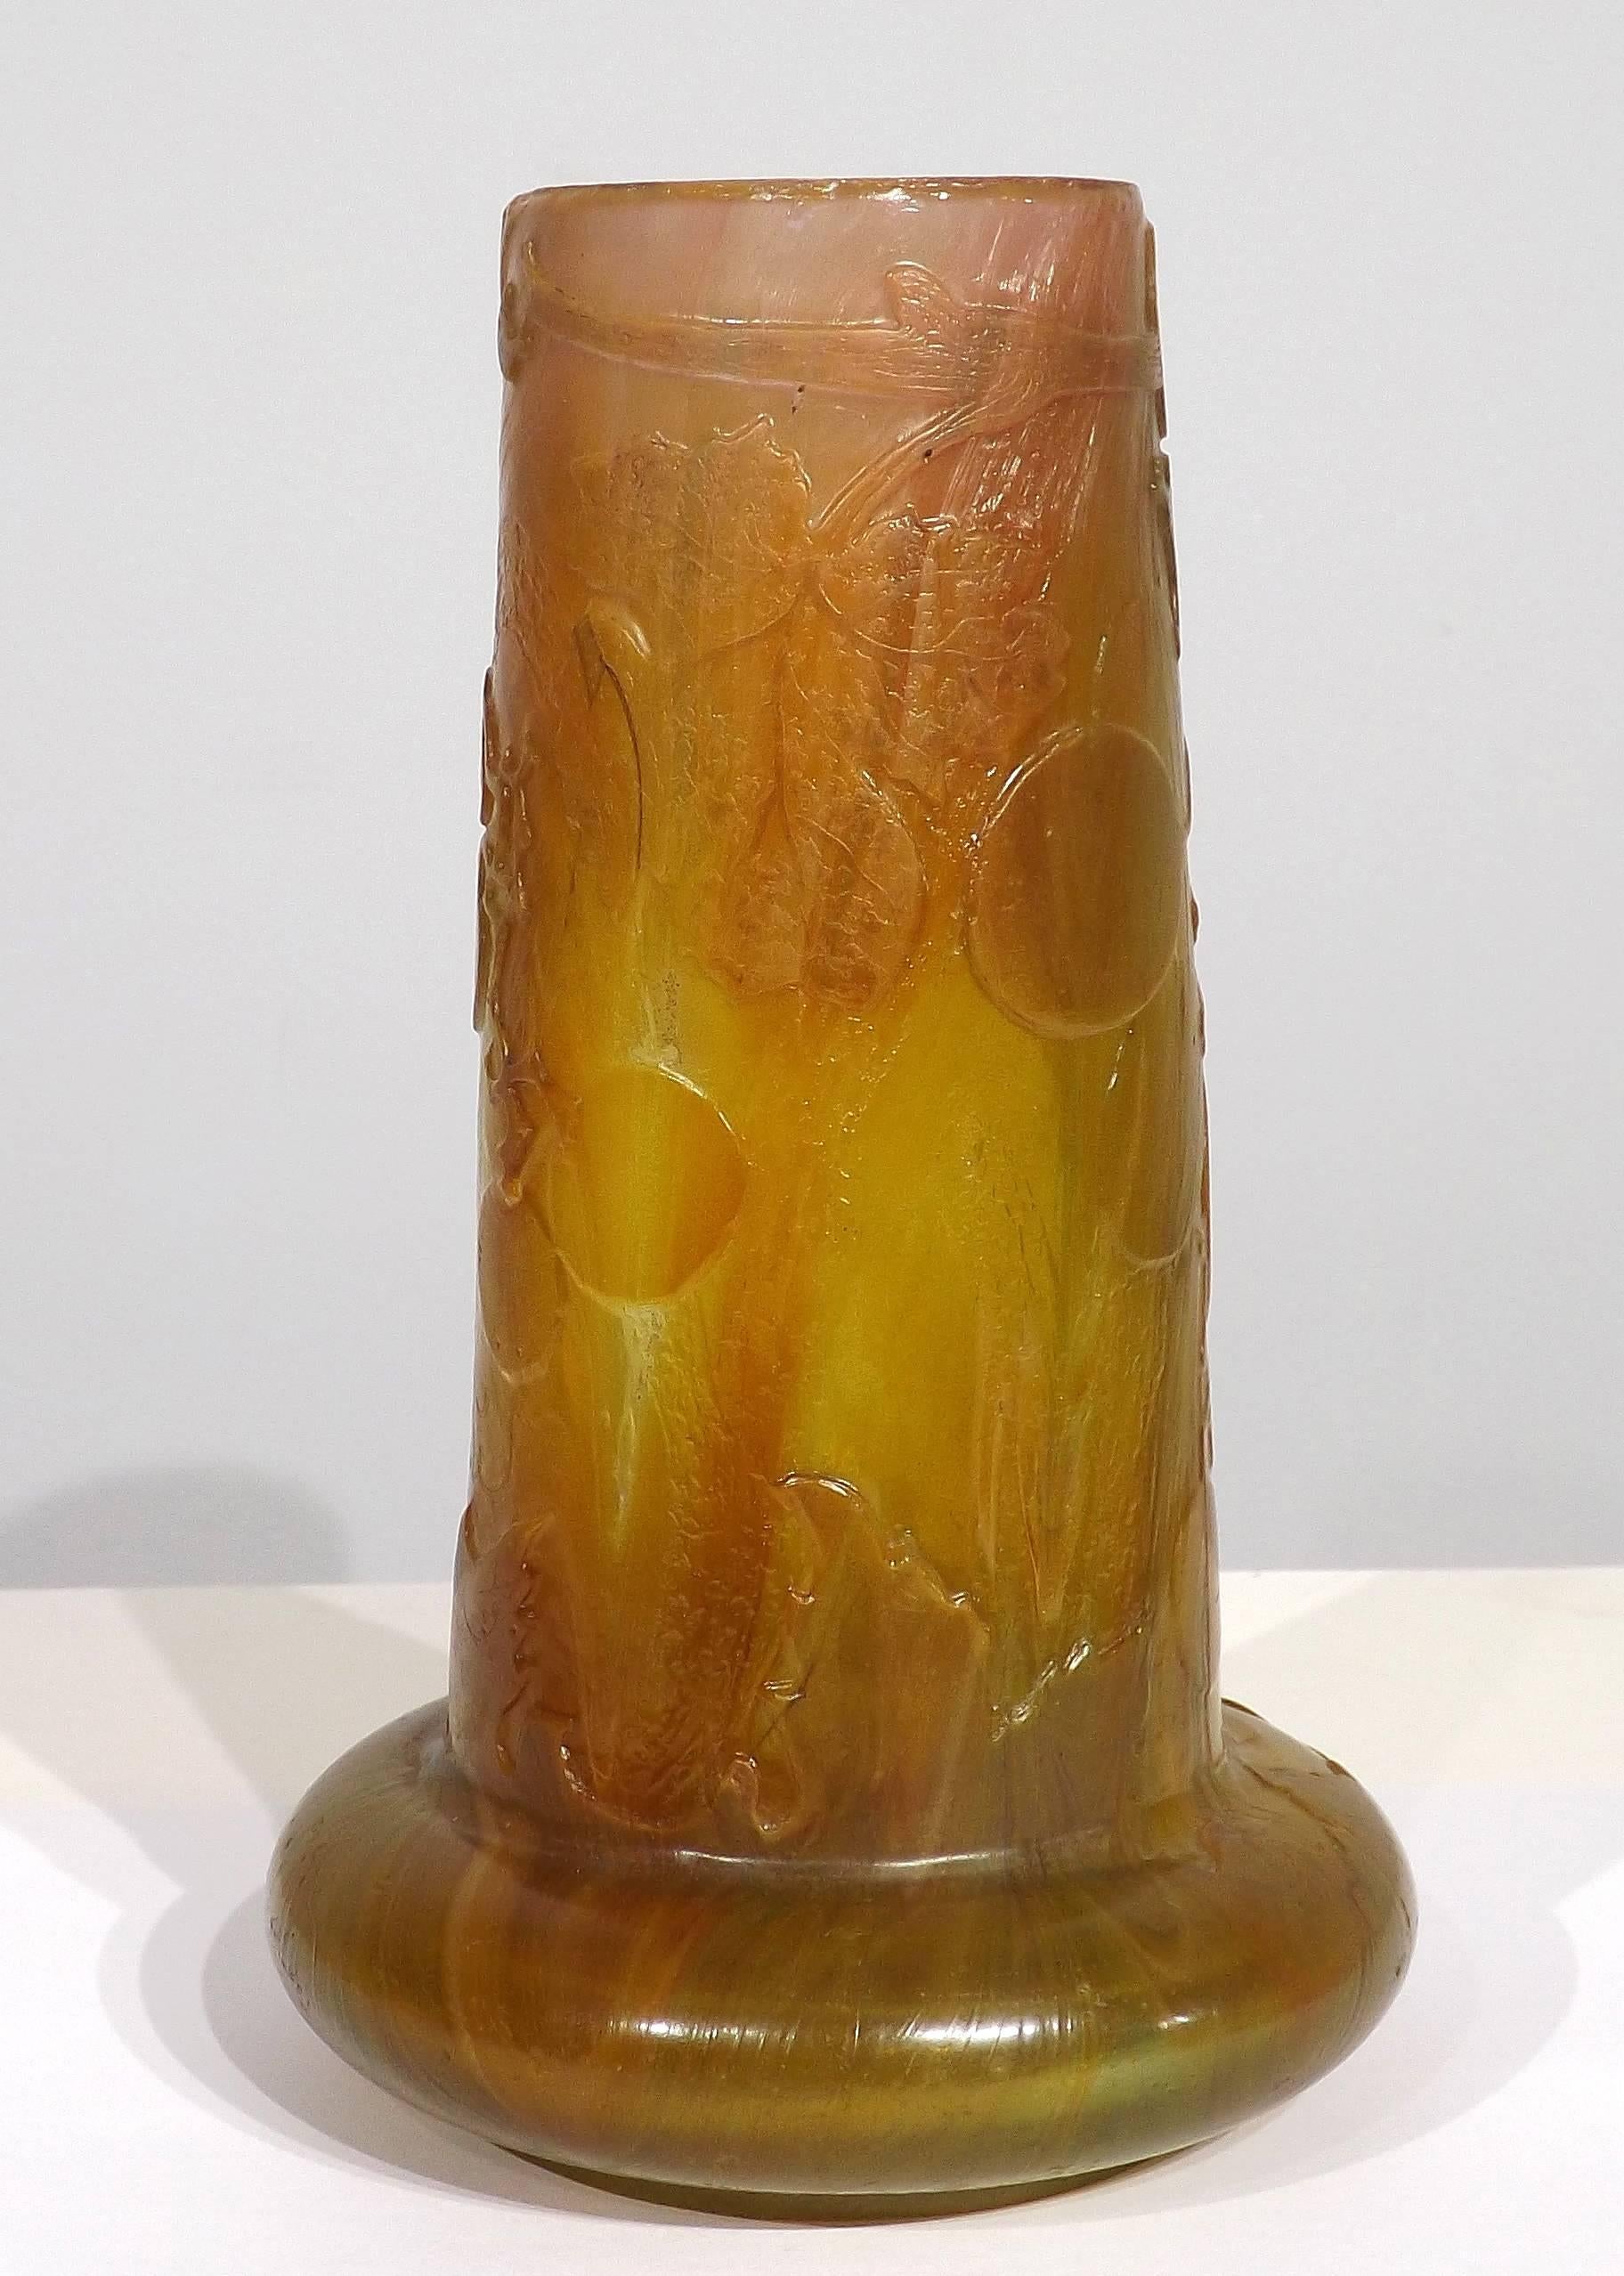 Oval carved cameo vase by Emile Galle´. Squat bulbous base with tapered body in shades of green and amber with internal striations of opalescent rose´. Finely carved stems of the grape vine with entwining tendrils and plump grapes. Intaglio